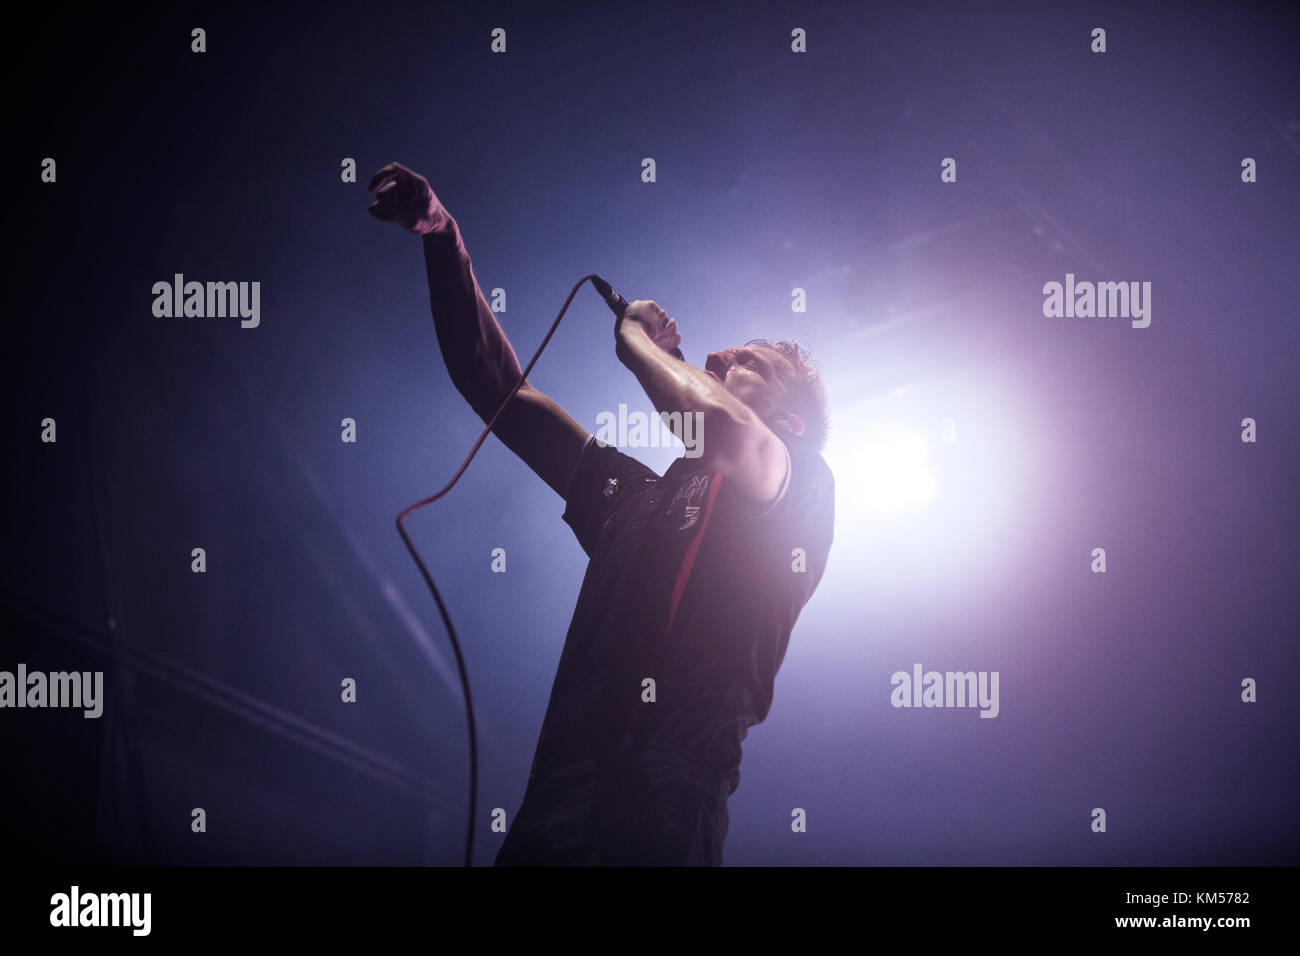 The German indie rock band Kraftklub combines different genres such as rock and rap and here performs a live concert at Palladium in Cologne. Here vocalist Felix Brummer is pictured live on stage. Germany, 26/02 2015. Stock Photo